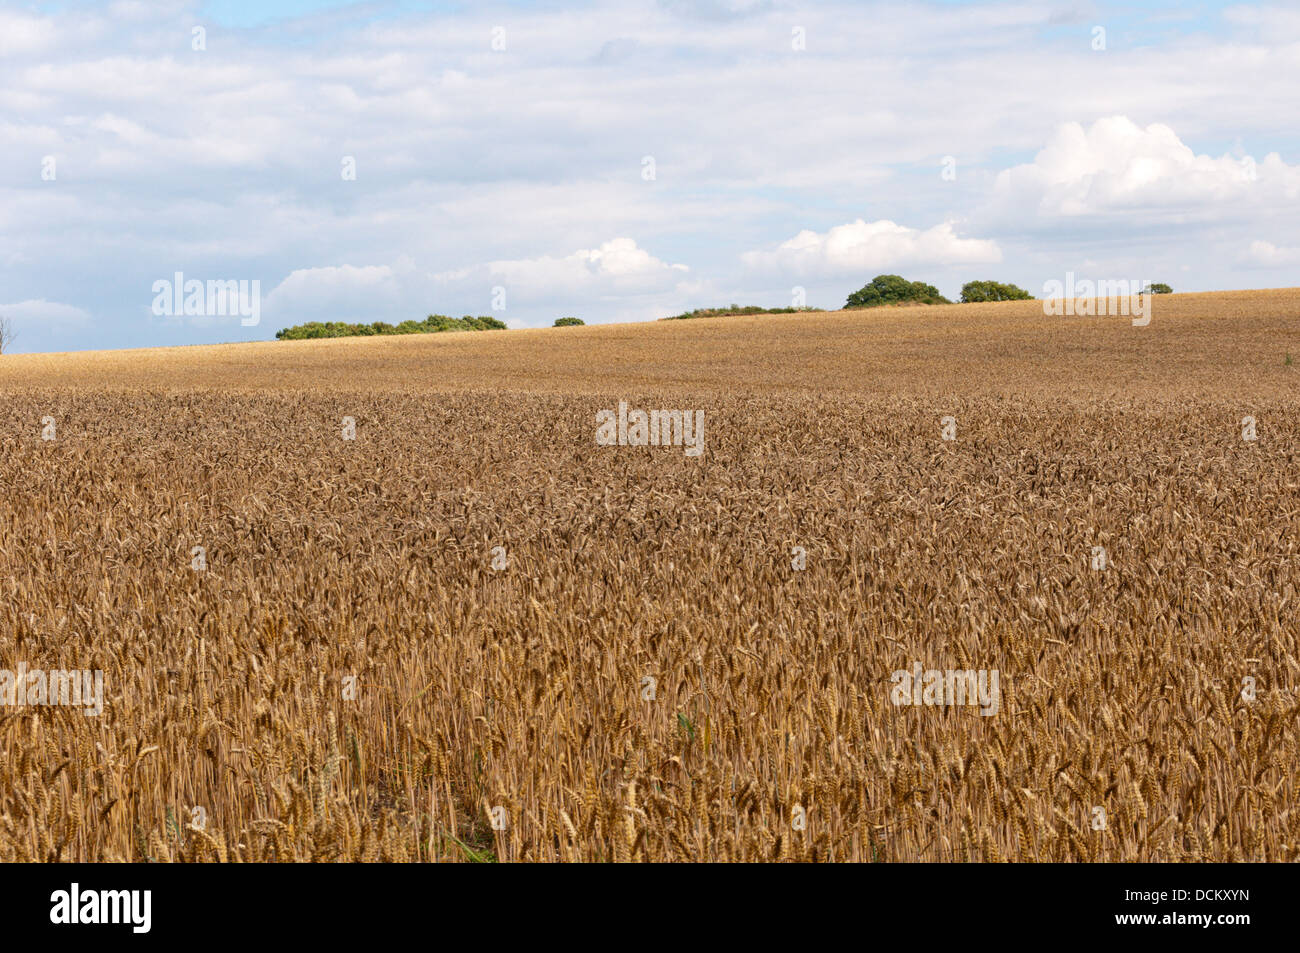 Field of corn growing in typical Essex farming scenery. Stock Photo